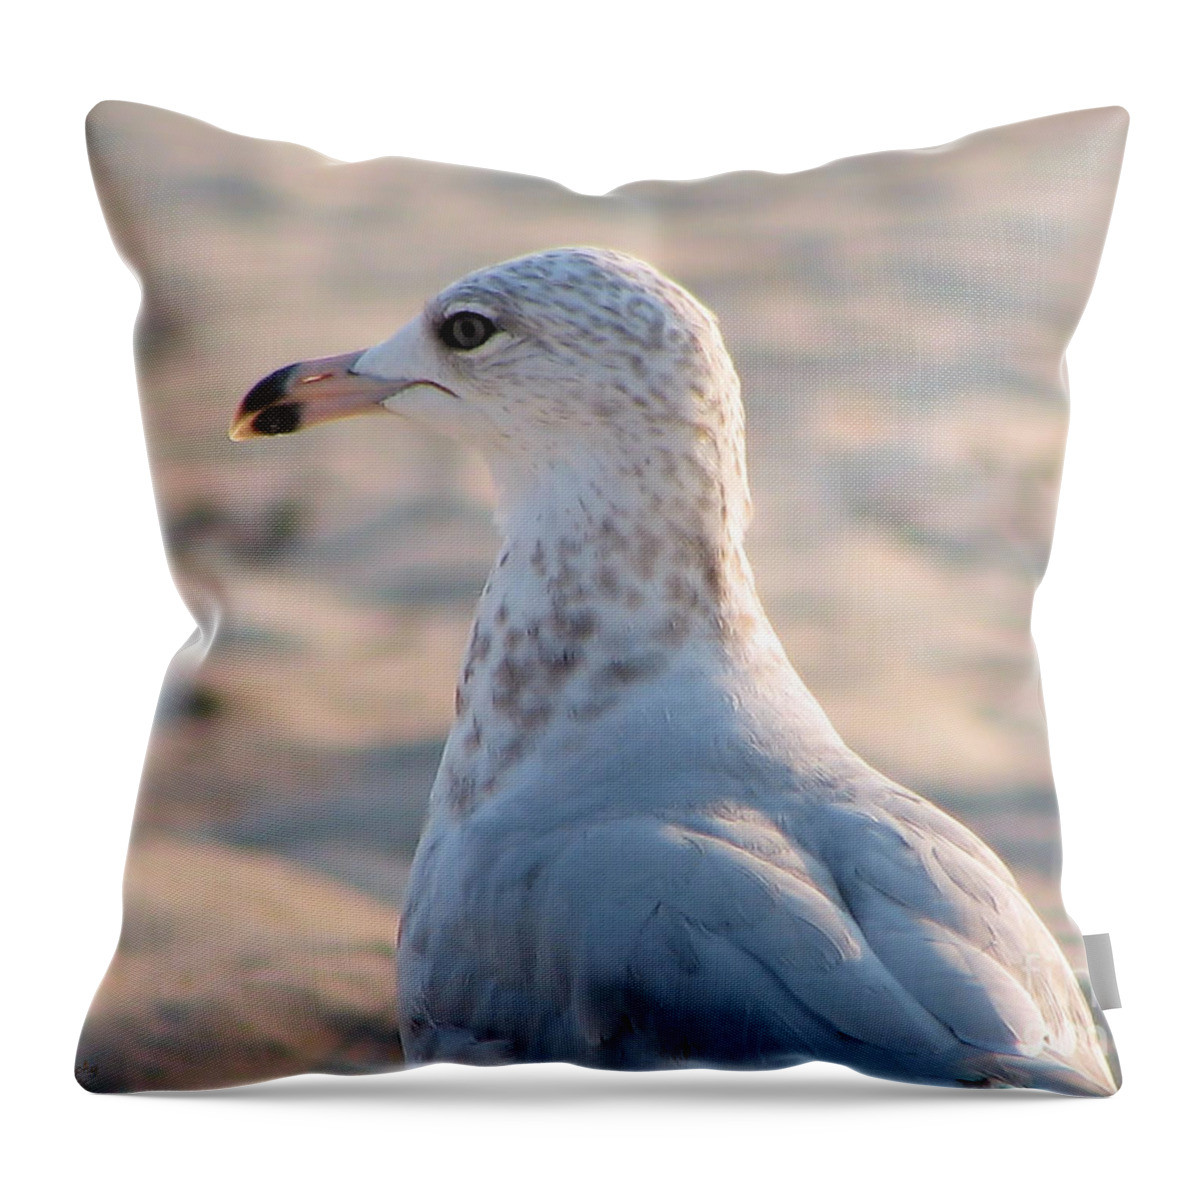 Seagull Throw Pillow featuring the photograph Lost In Thought by Roxy Riou